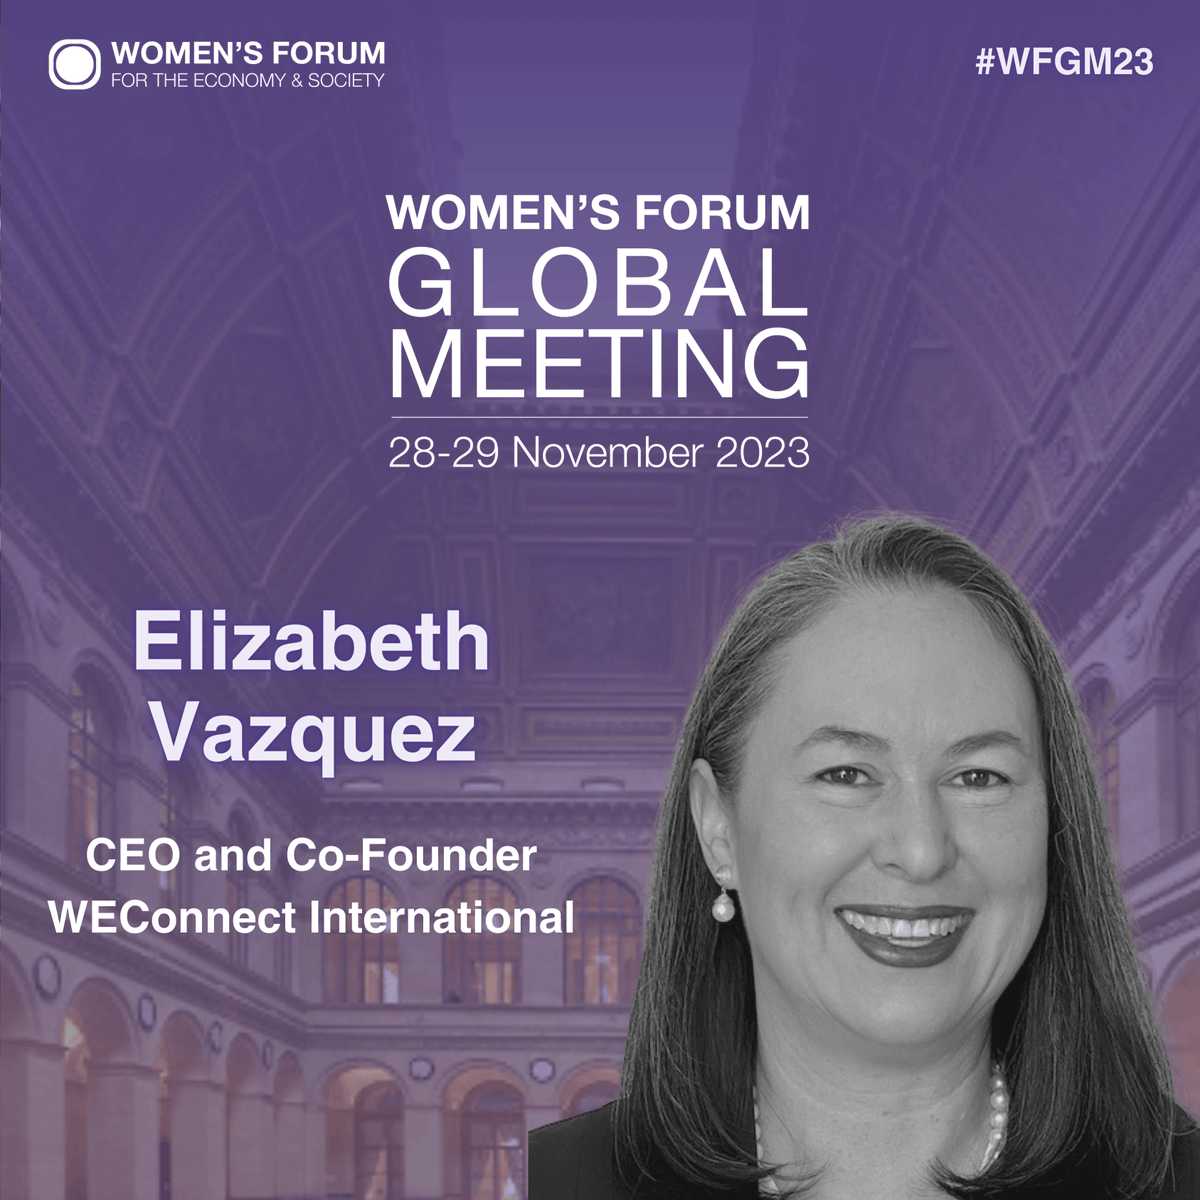 Thrilled to announce that @CEOVazquez will be a speaker at #WFGM23! 🌟 

The @womens_forum is the world’s leading platform, highlighting women’s voices on major economic and social issues. See you in Paris at the Palais Brongniart, on November 28-29!